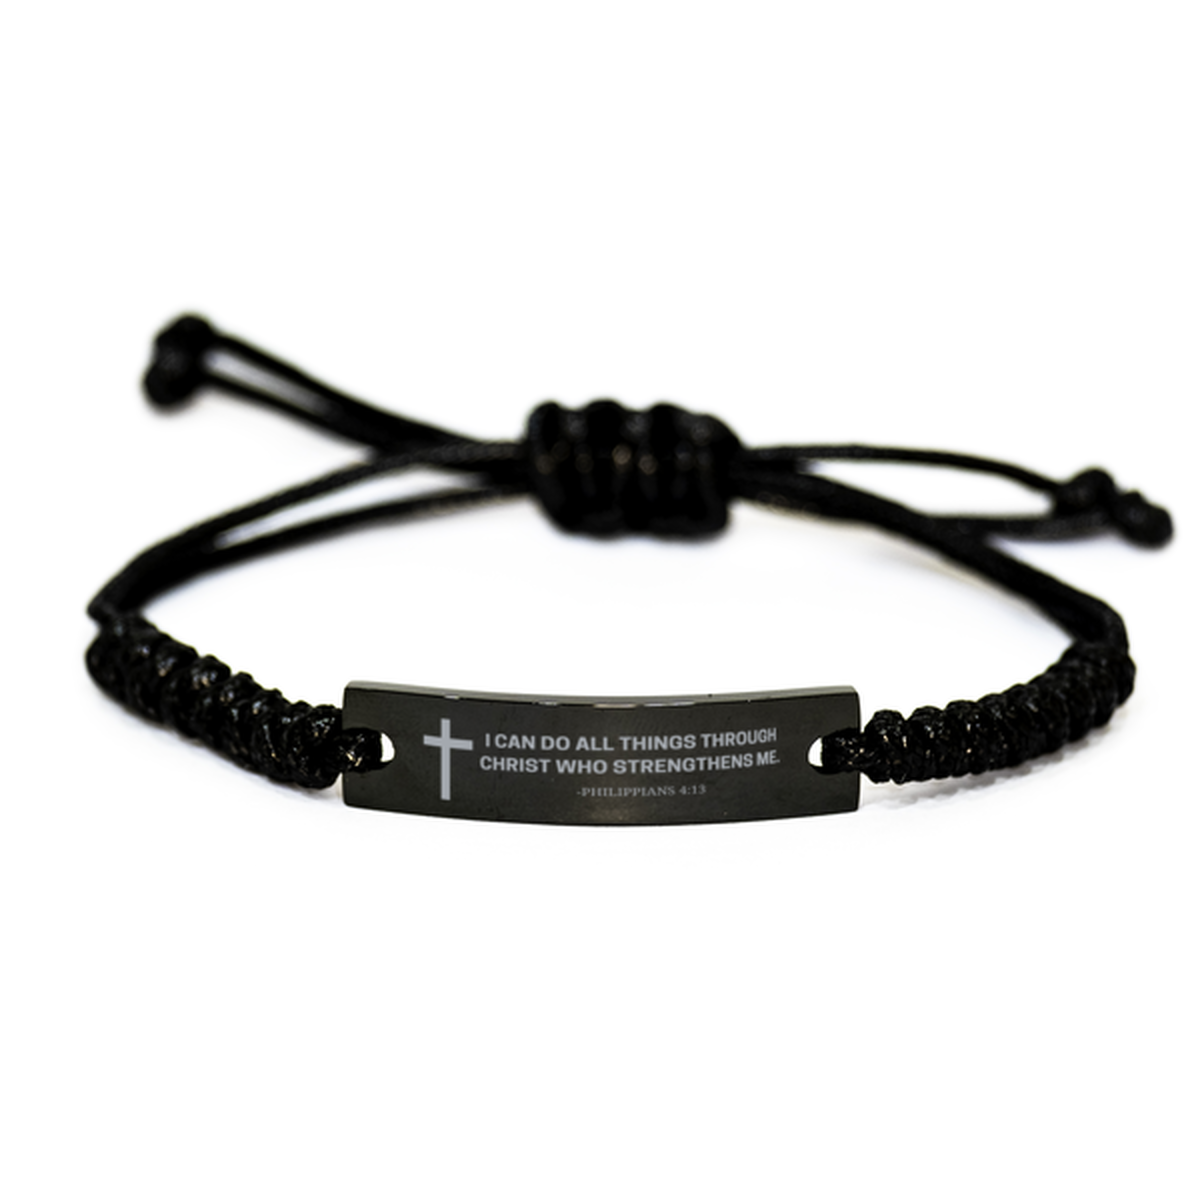 Baptism Gifts For Teenage Boys Girls, Christian Bible Verse Black Rope Bracelet, I can do all things through Christ, Catholic Confirmation Gifts for Son, Godson, Grandson, Nephew